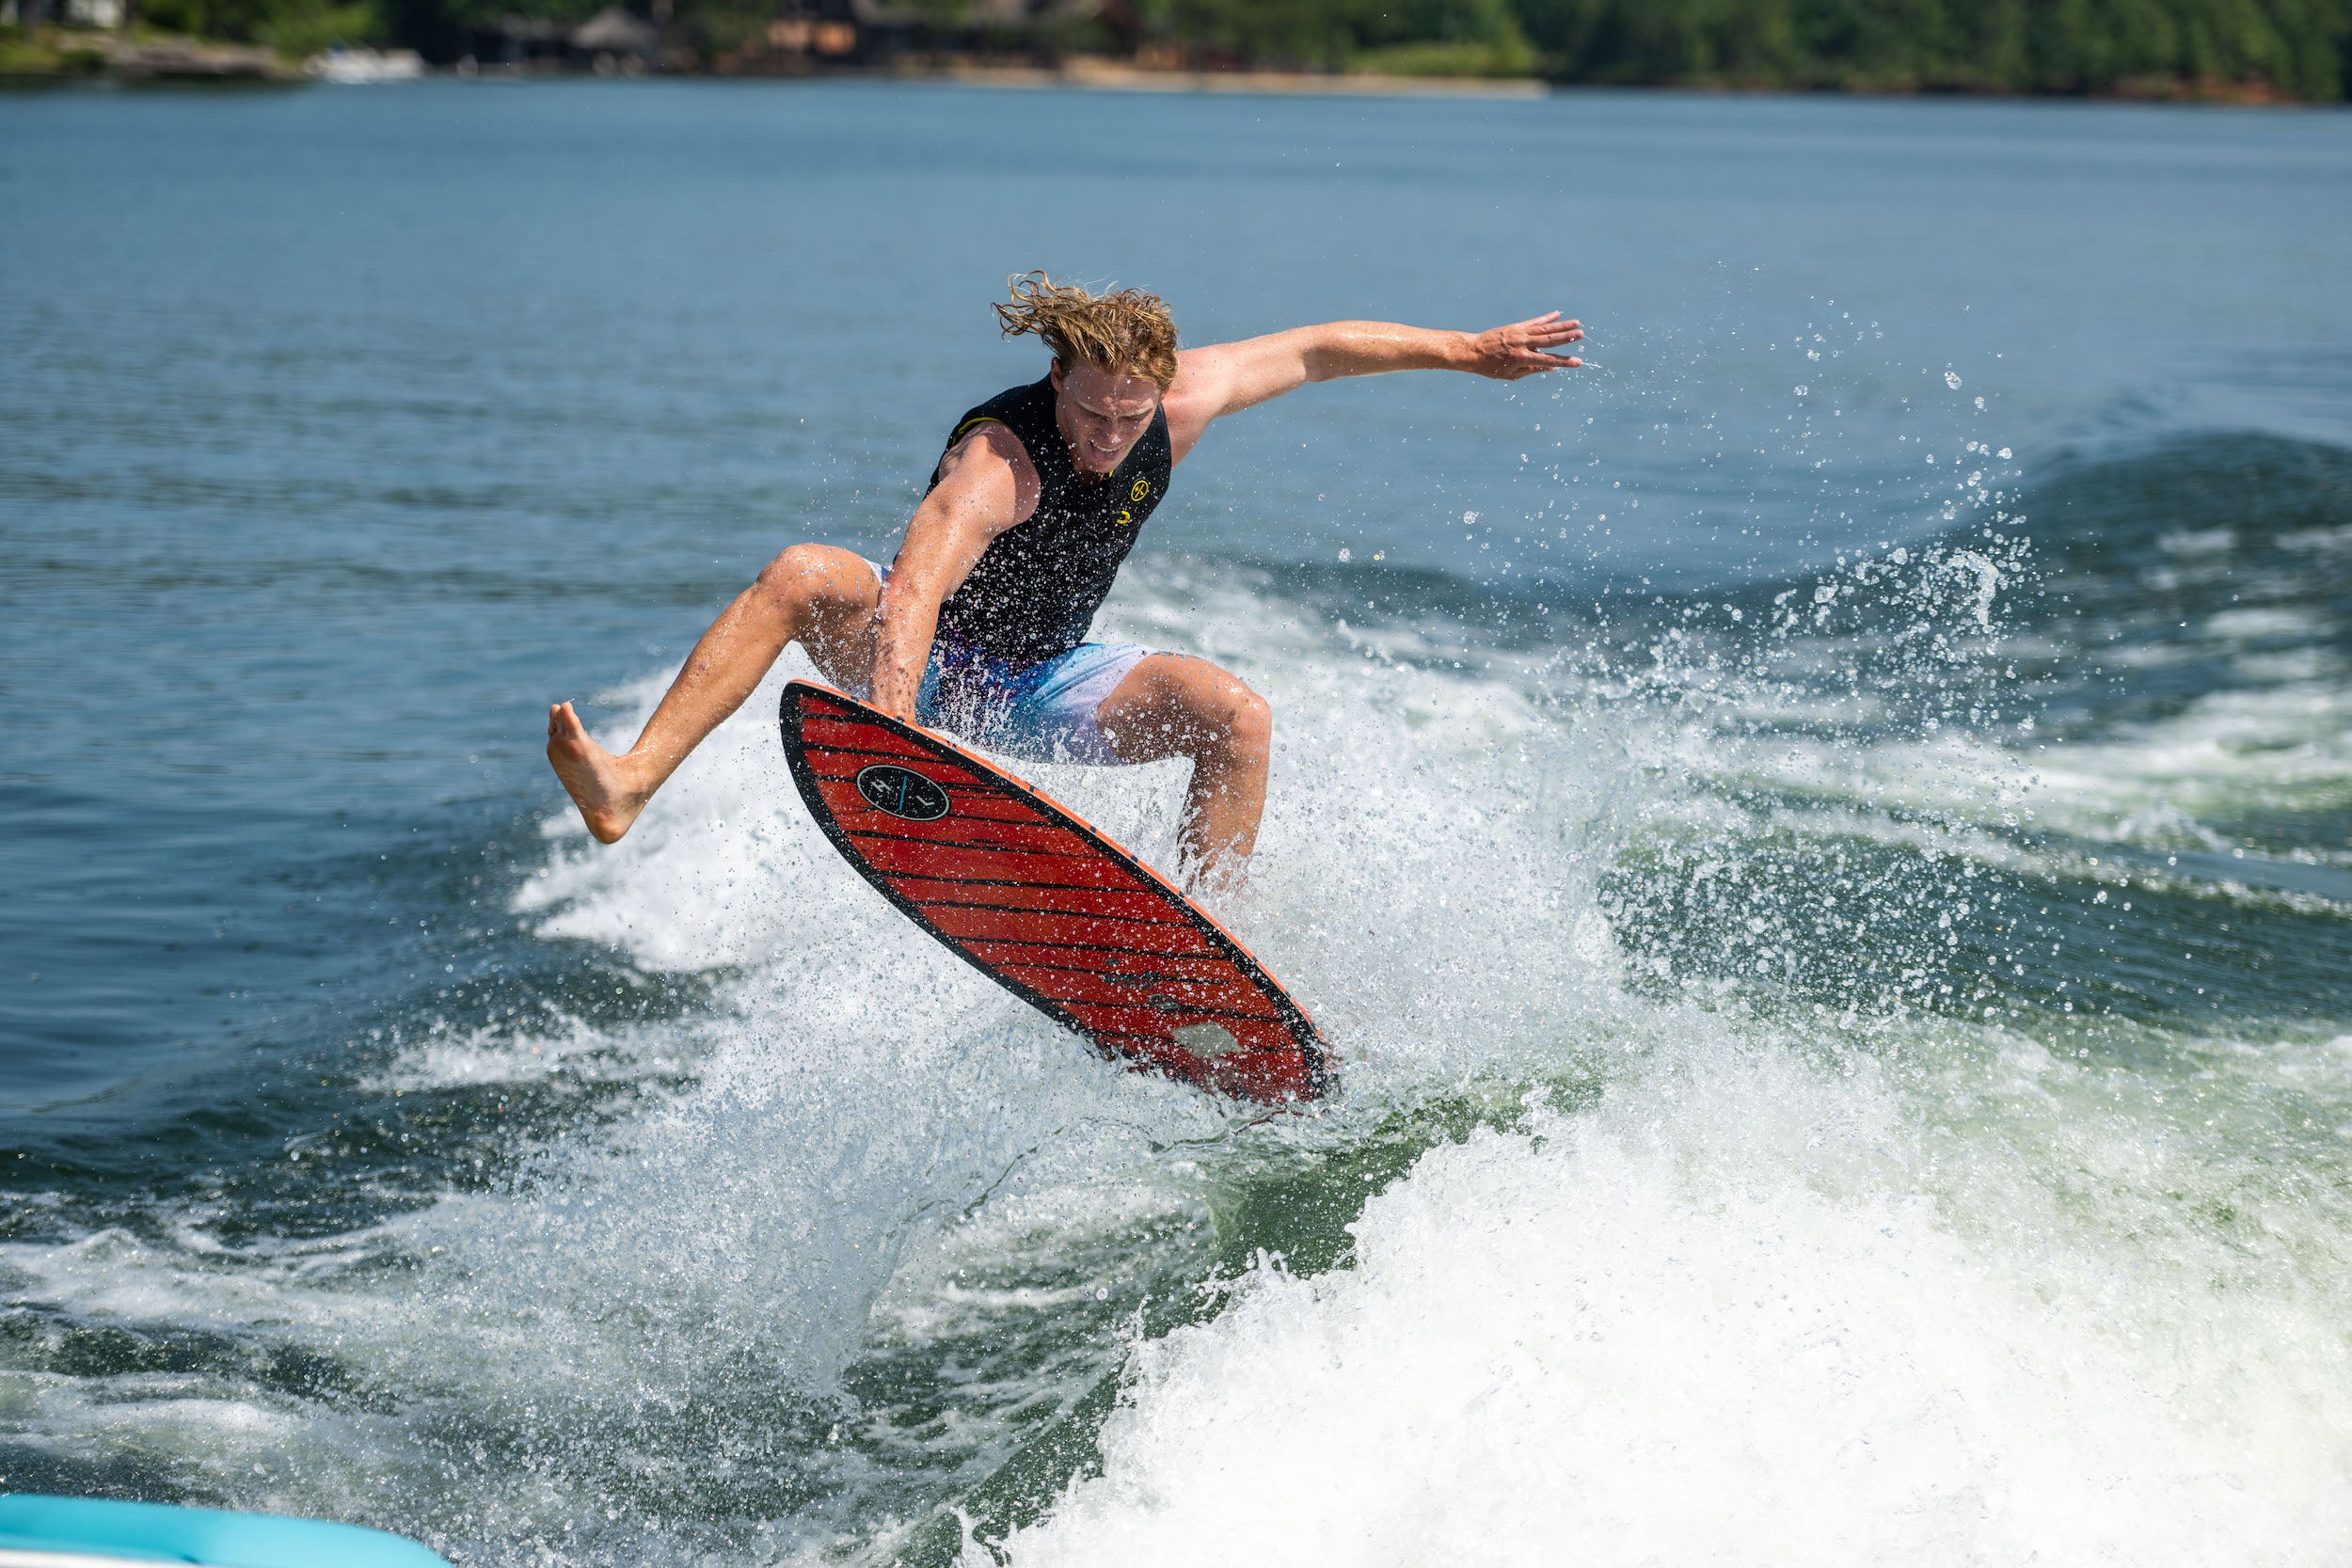 A man is riding a wave on a surfboard with Hyperlite 2023 Hi-Fi Wakesurf Board features.